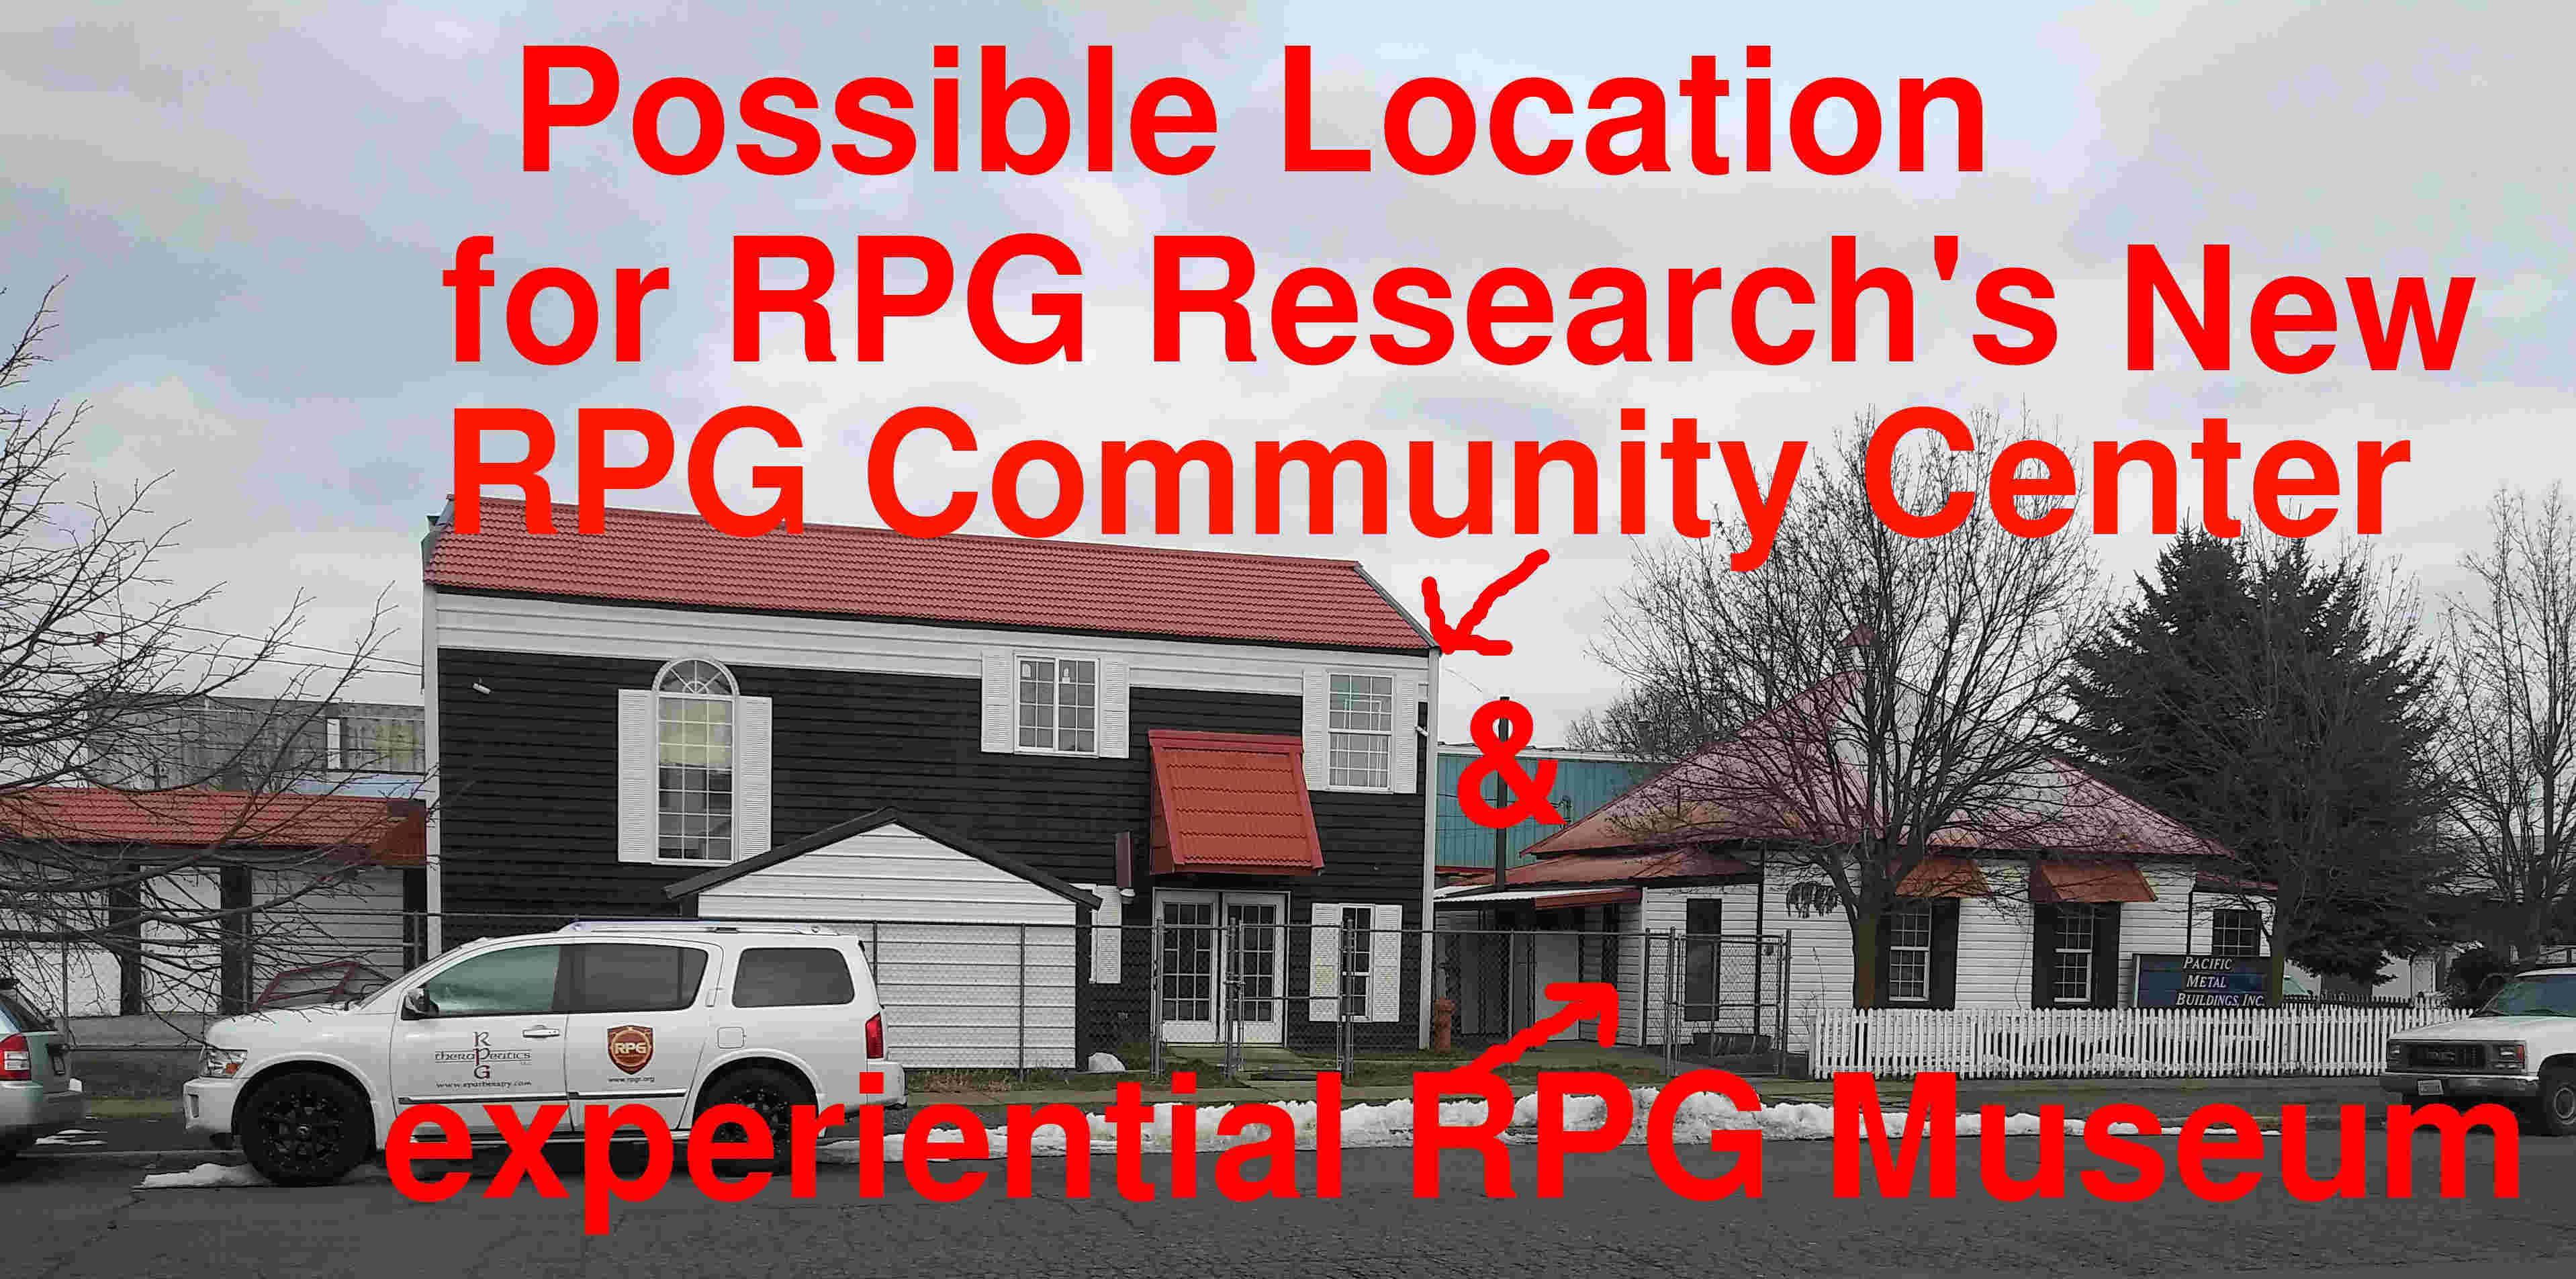 Possible New Location of RPG Community Center, Research Center, & RPG Museum - Cover Image